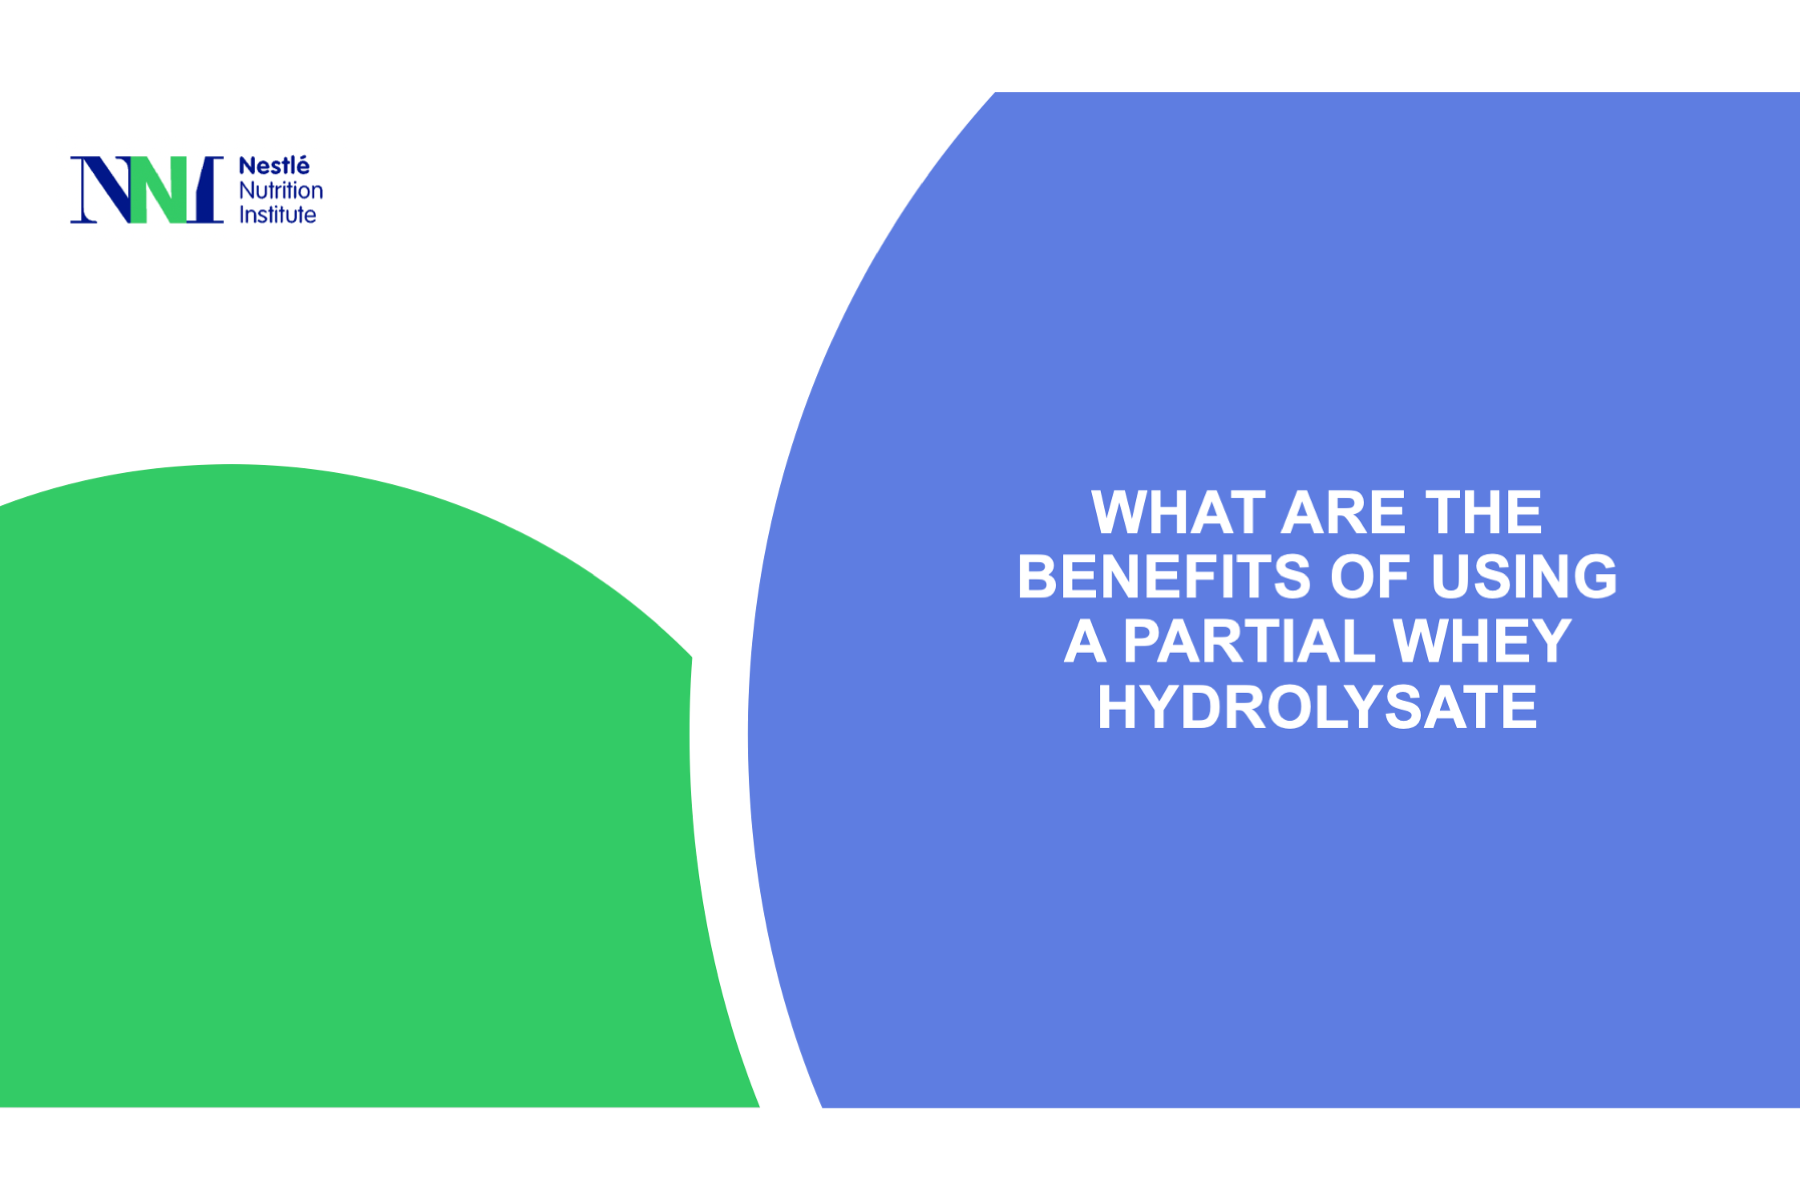 What Are The Benefits of Using a Partial Whey Hydrolysate?